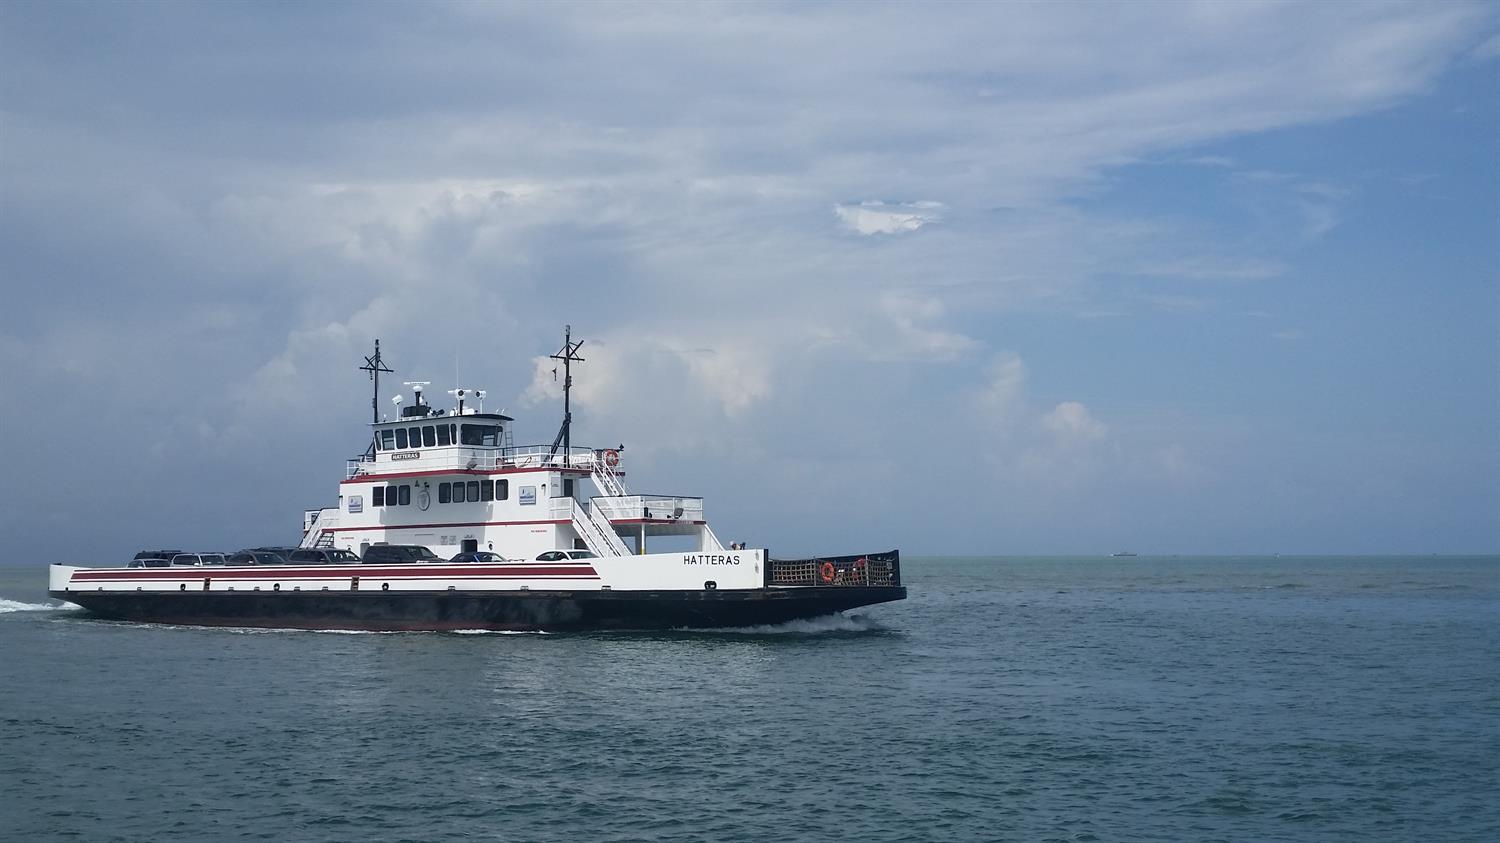 N.C. Ferry Division to host career event in Hatteras on Feb. 28